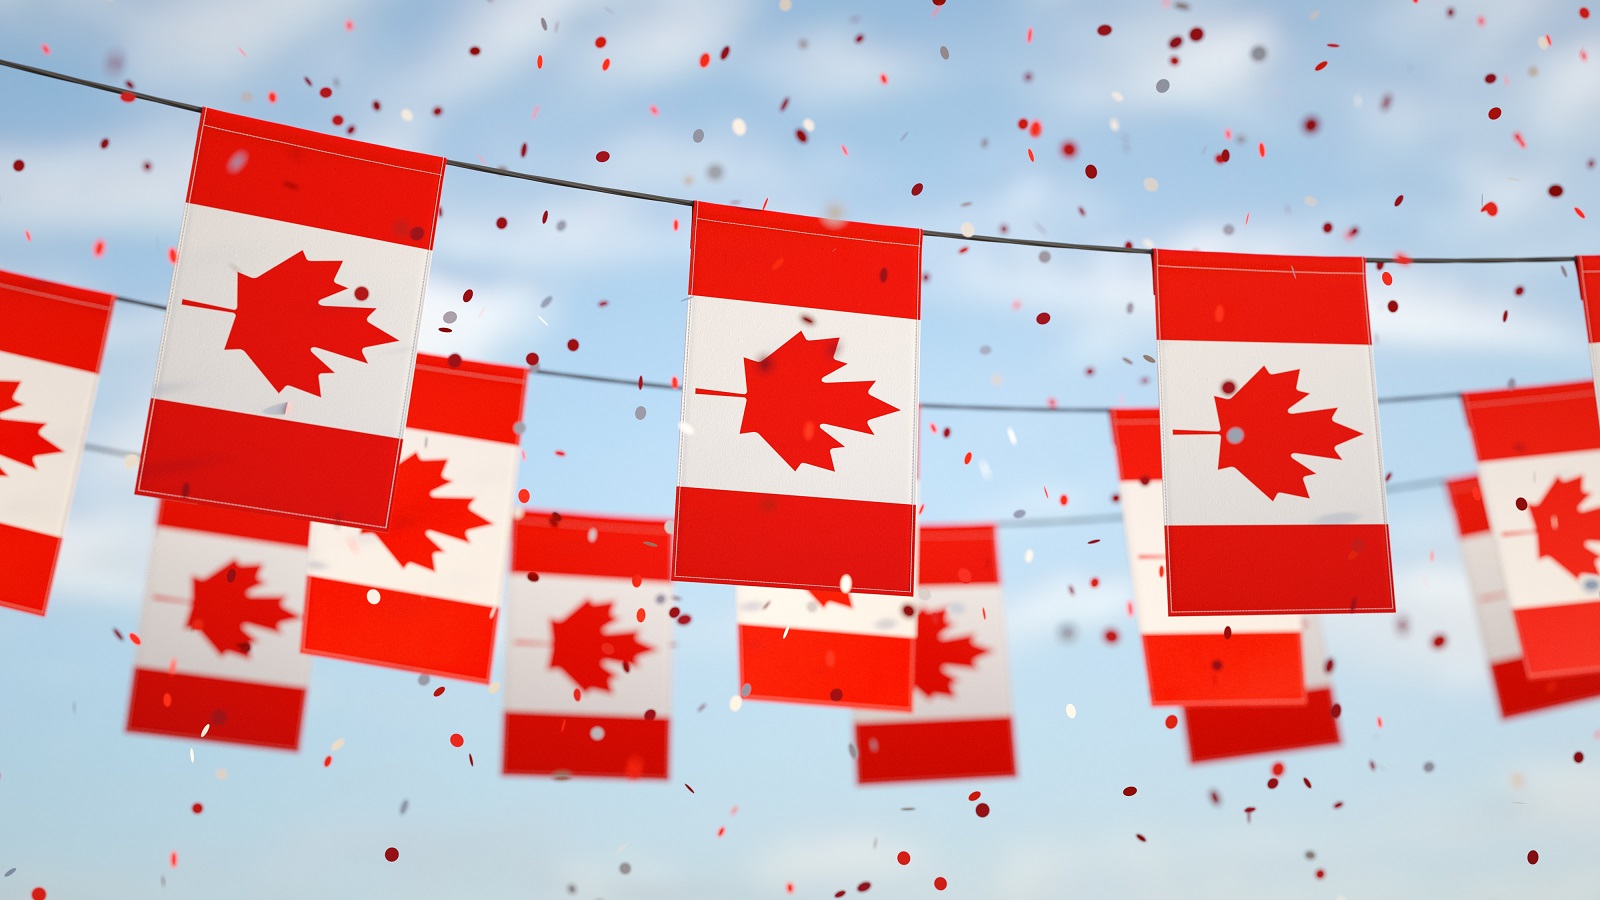 Three Rows of Garlands of Canadian Flags Against a Slightly Cloudy Blue Sky with Red and White Confetti Falling in the Air